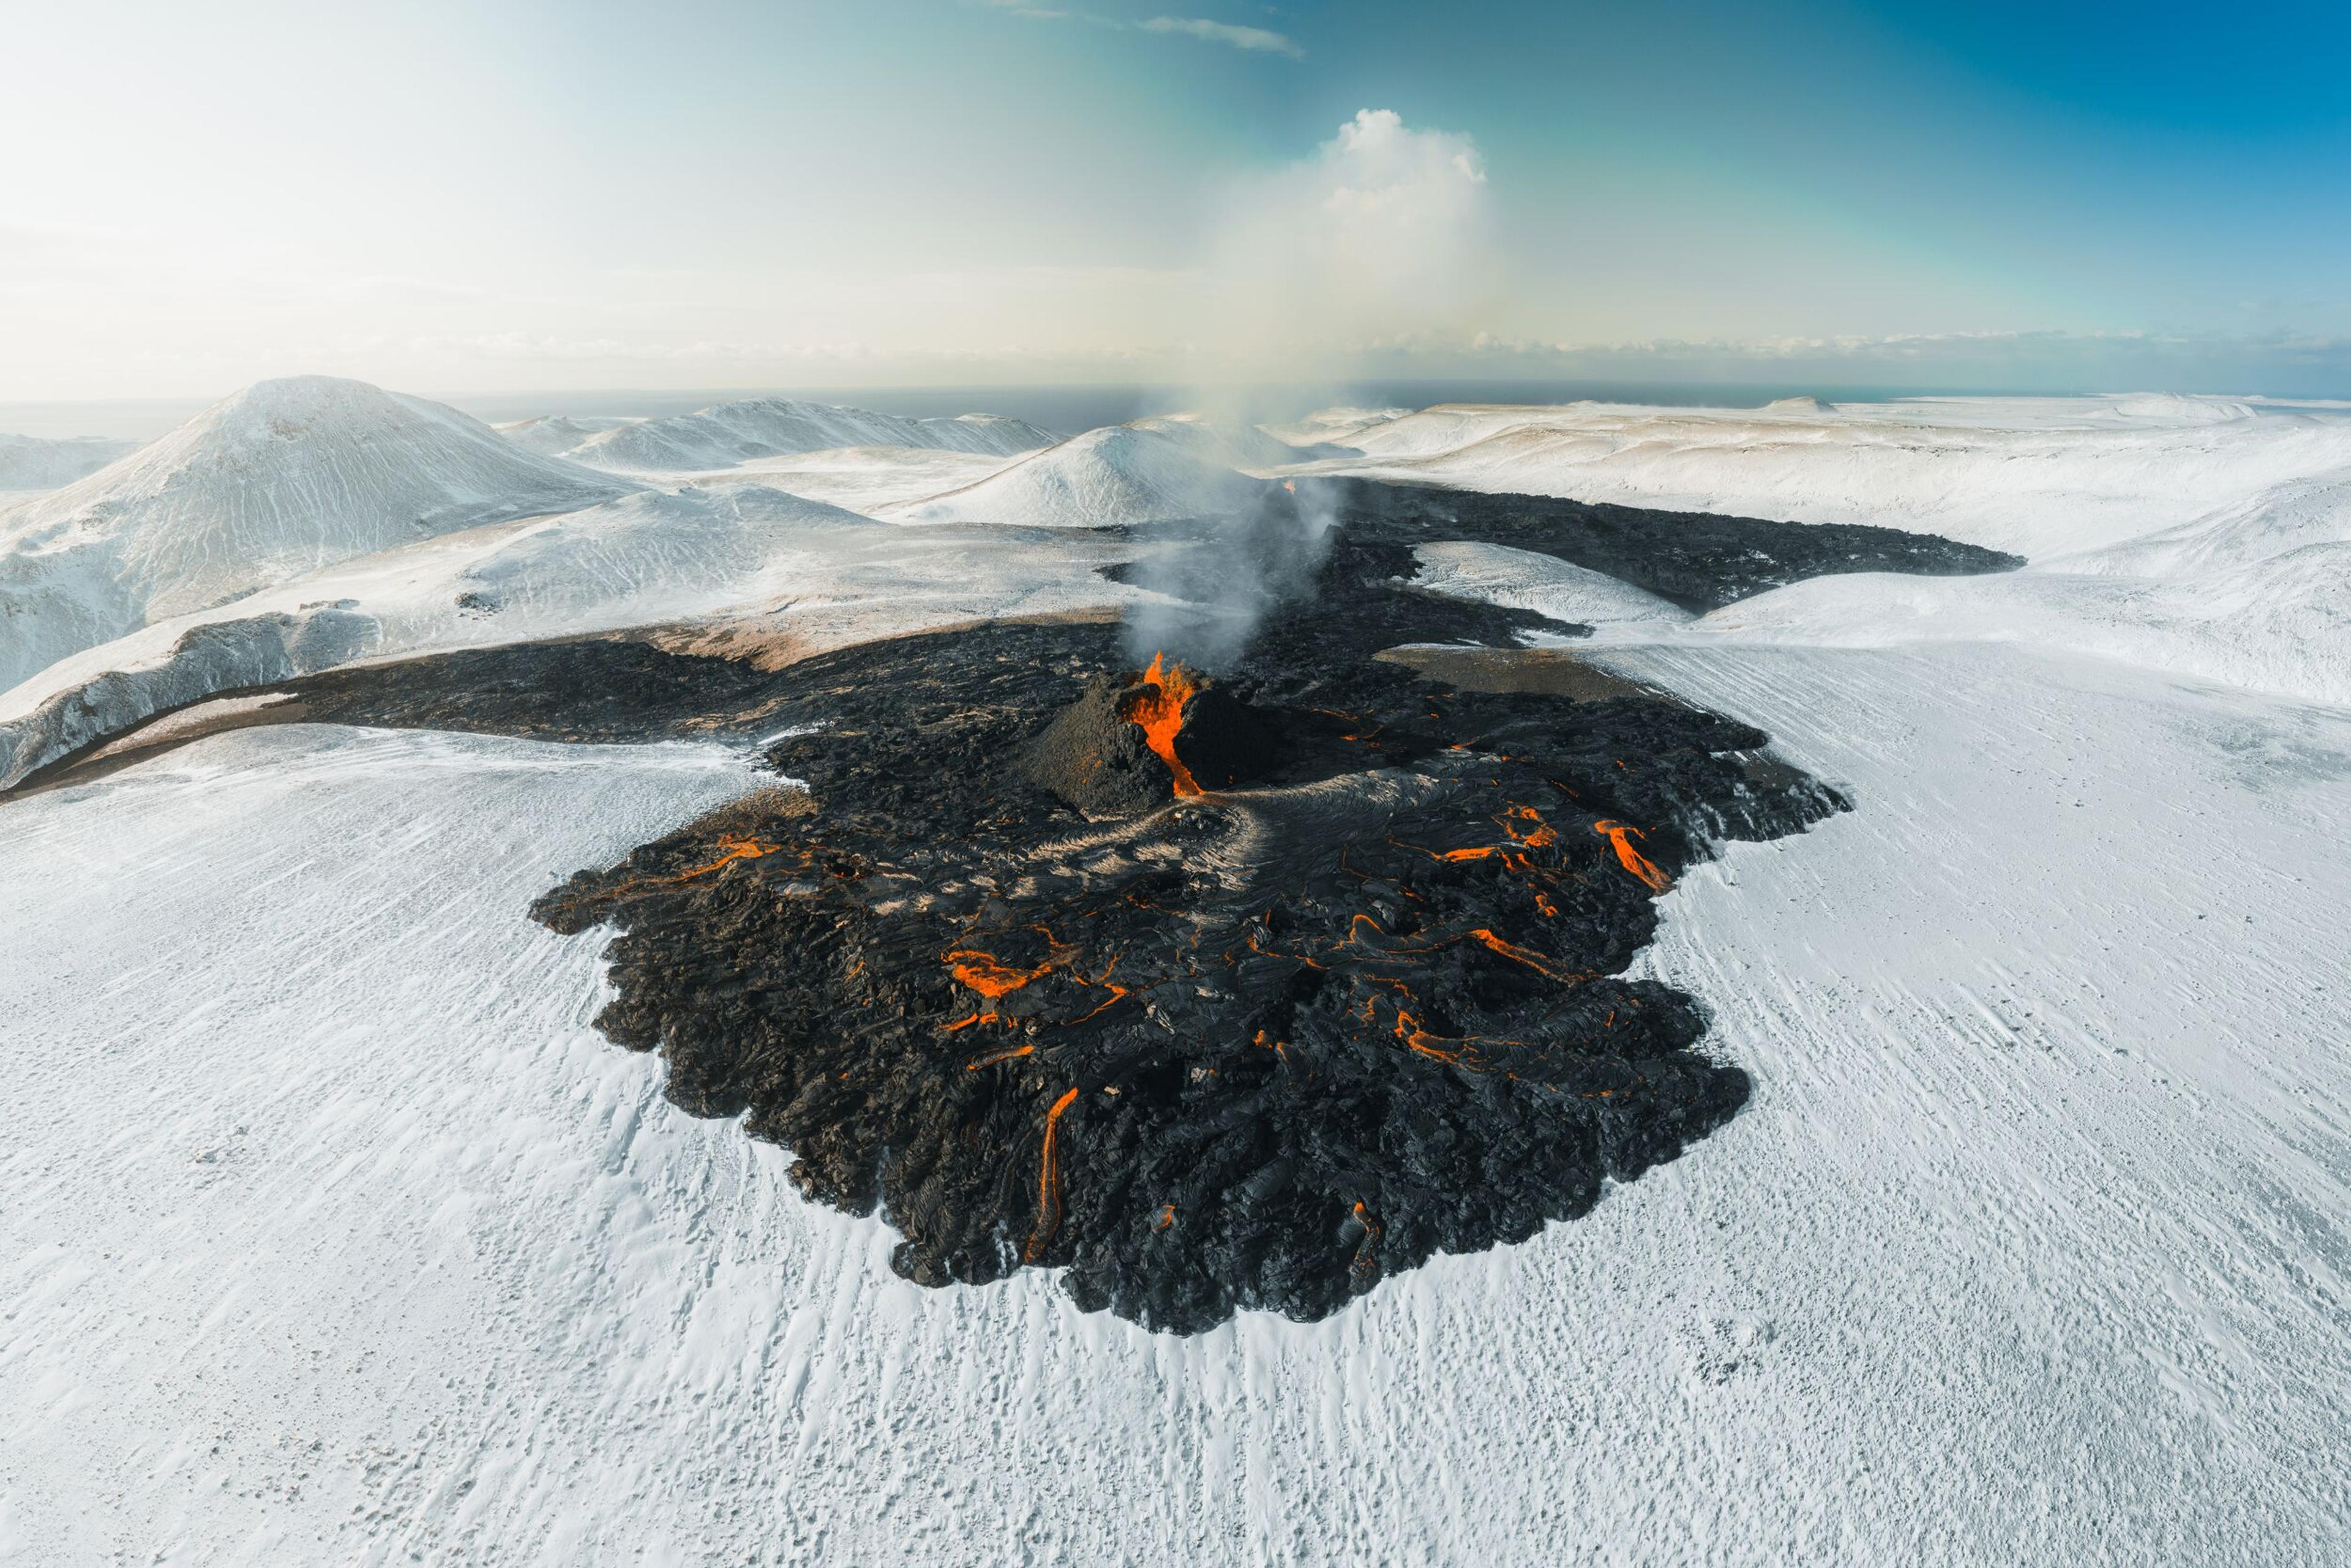 Icelandic volcano with orange lava erupting, surrounded by snow-covered ground, under a clear sky.